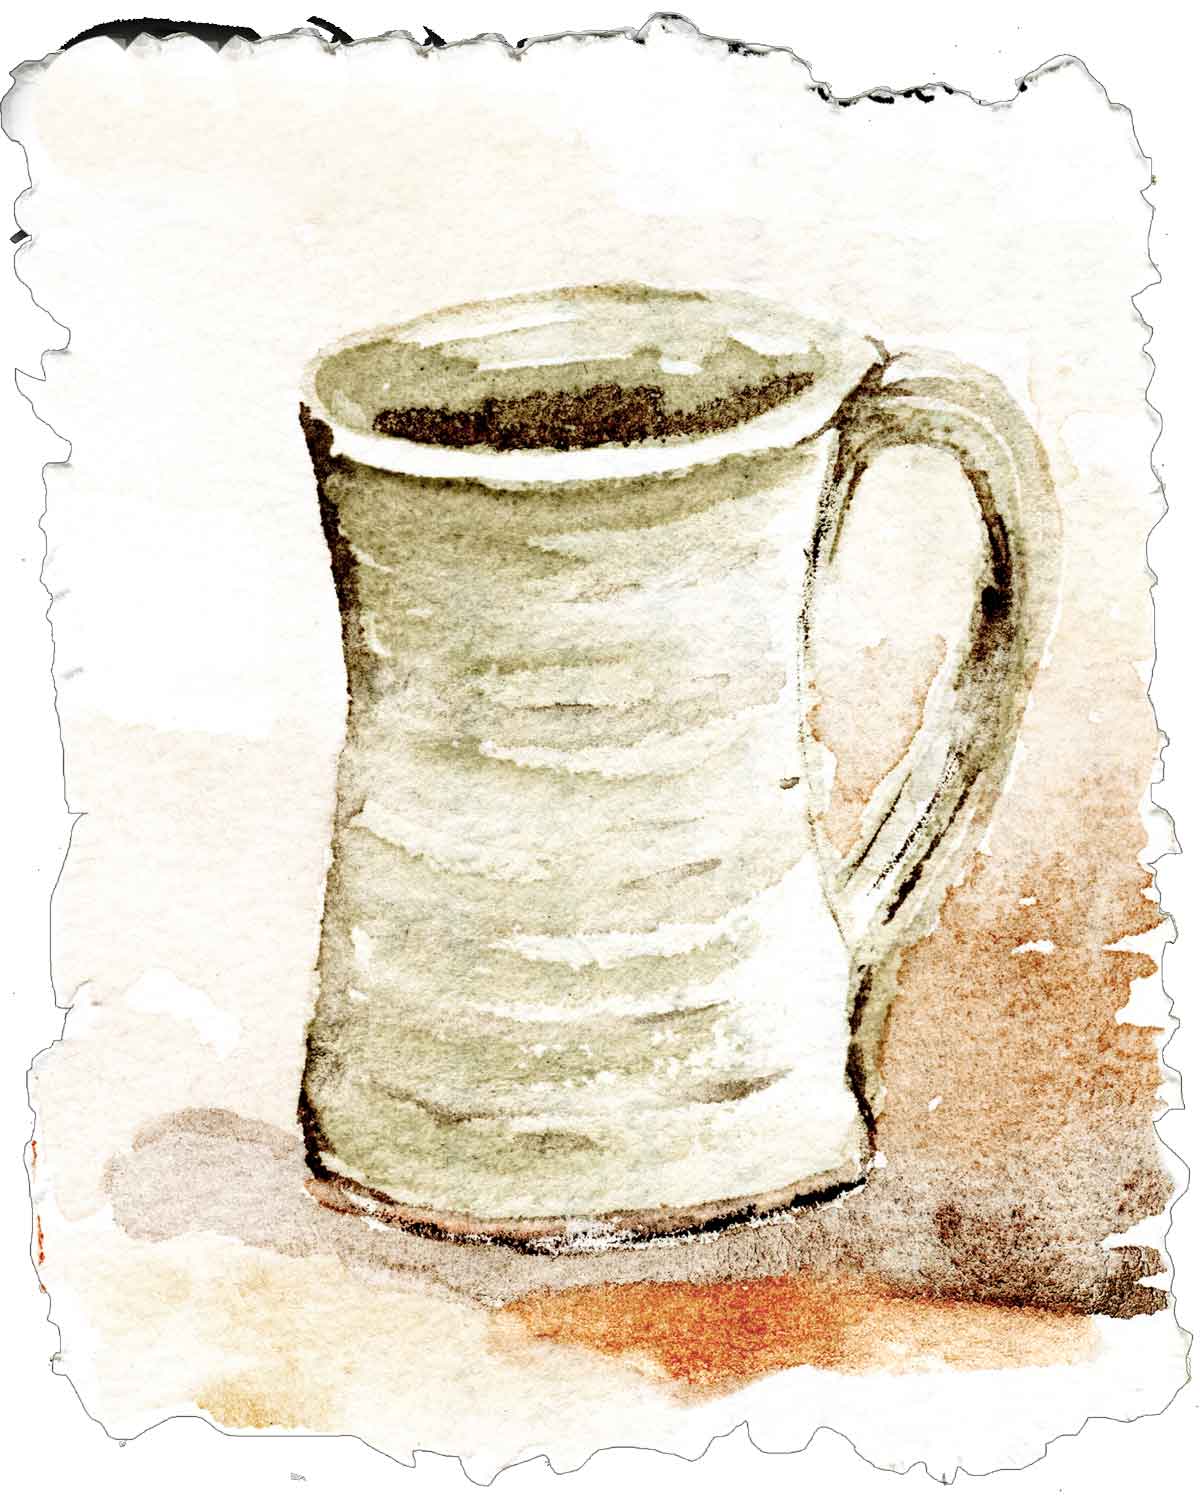 My favorite mug, first in the Coffeetime collection. I painted this one before the painting marathon began.